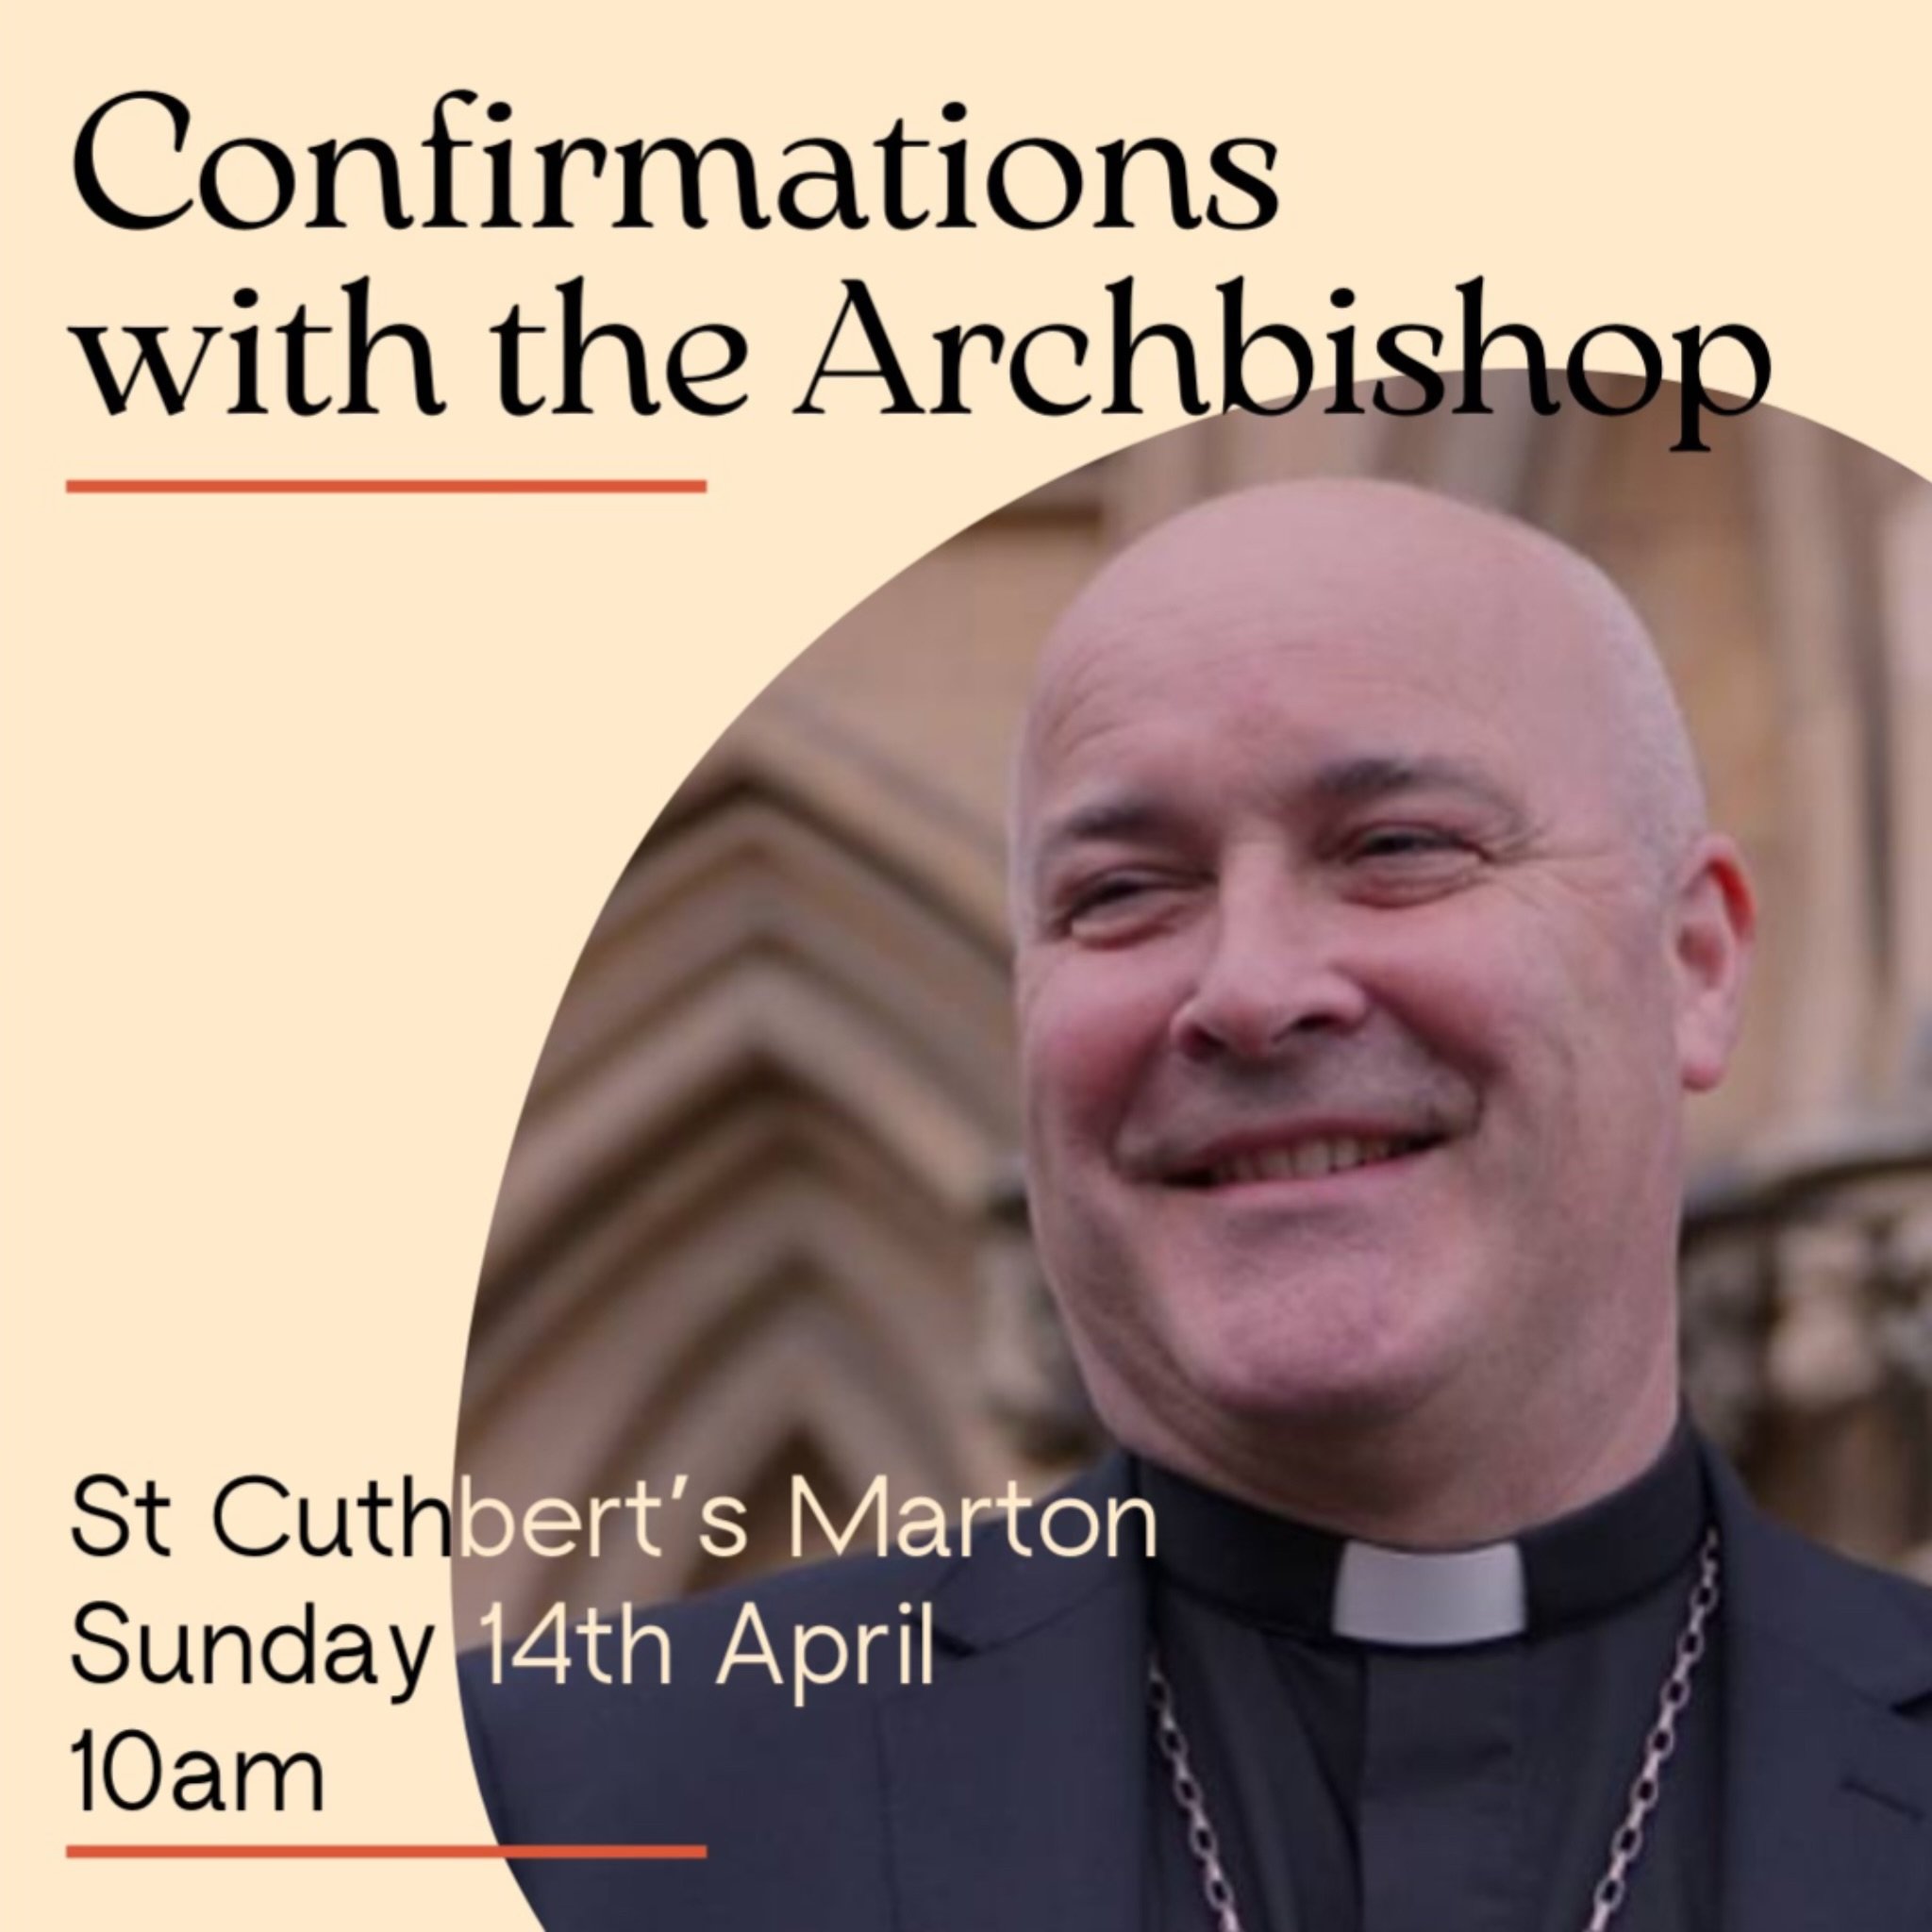 If you're free on Sunday morning come and support Jenny &amp; Jerome, plus all the other candidates being Confirmed by the Archbishop at the 10am service. 

We will eat lunch together after the service so please bring food to share.

We will still be